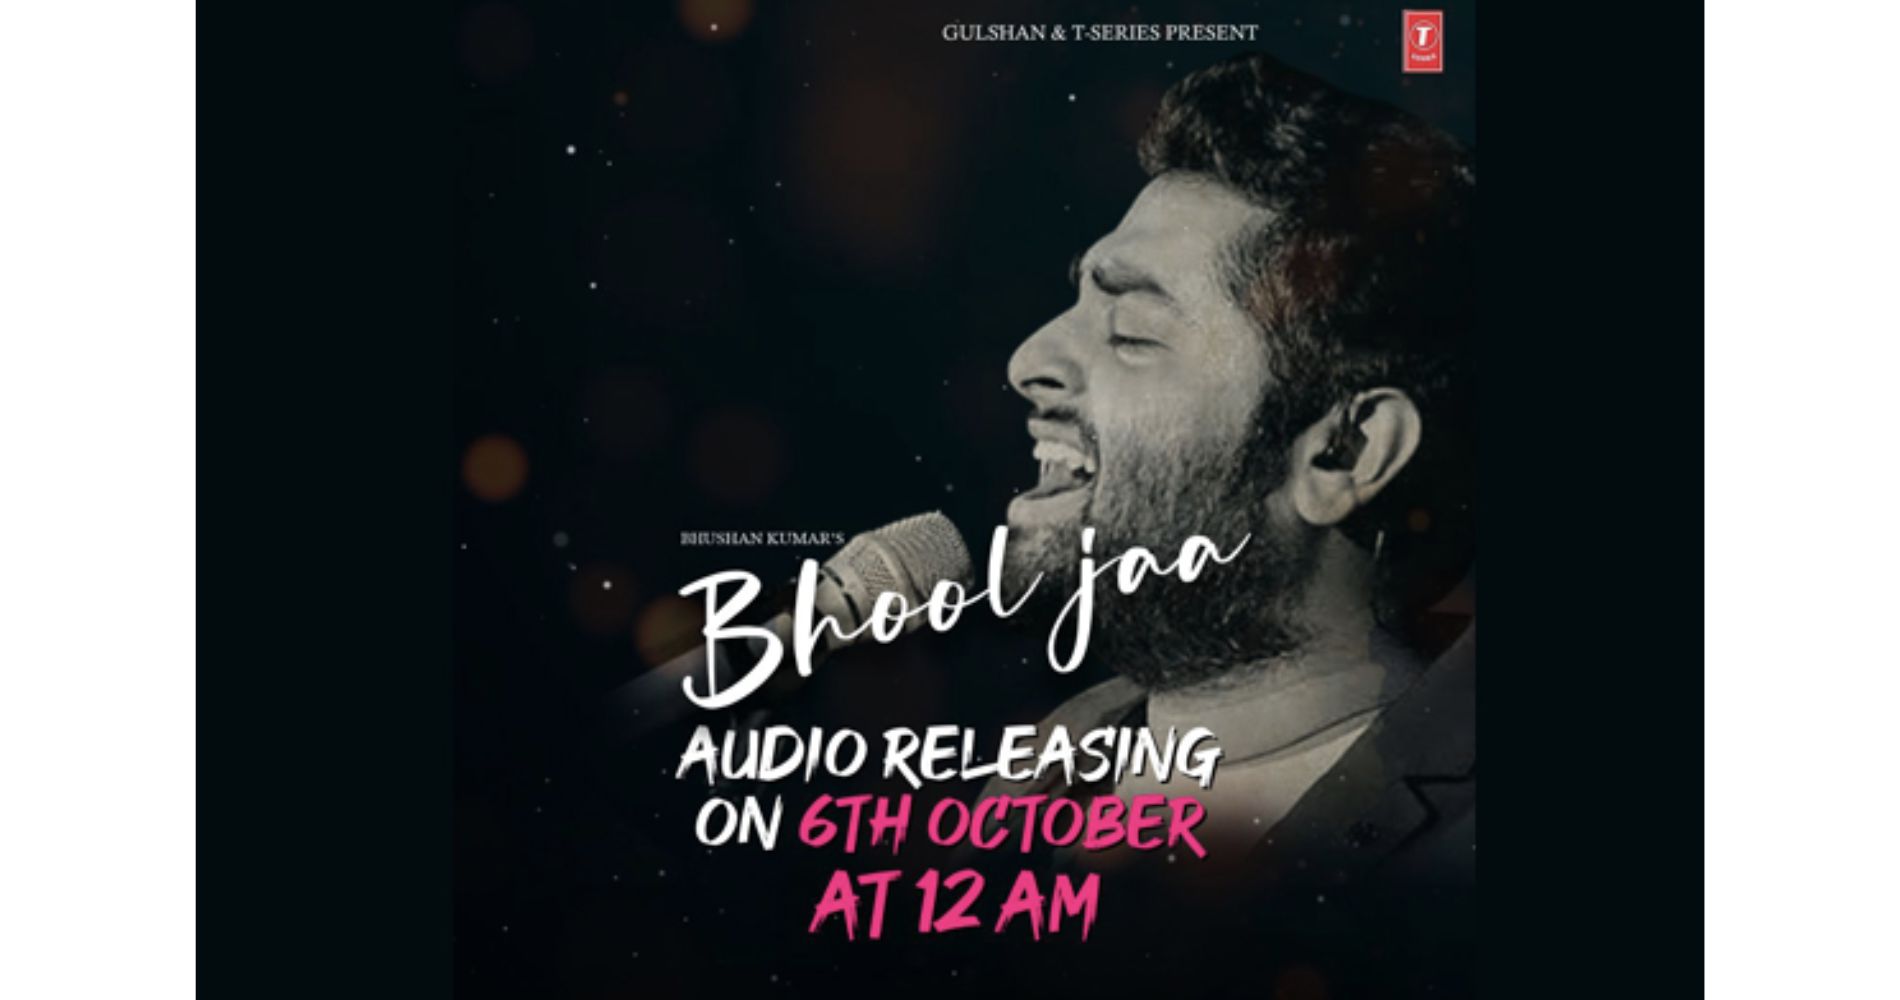 T-Series To officially Launch Arijit Singh's 'Bhool Jaa' After The